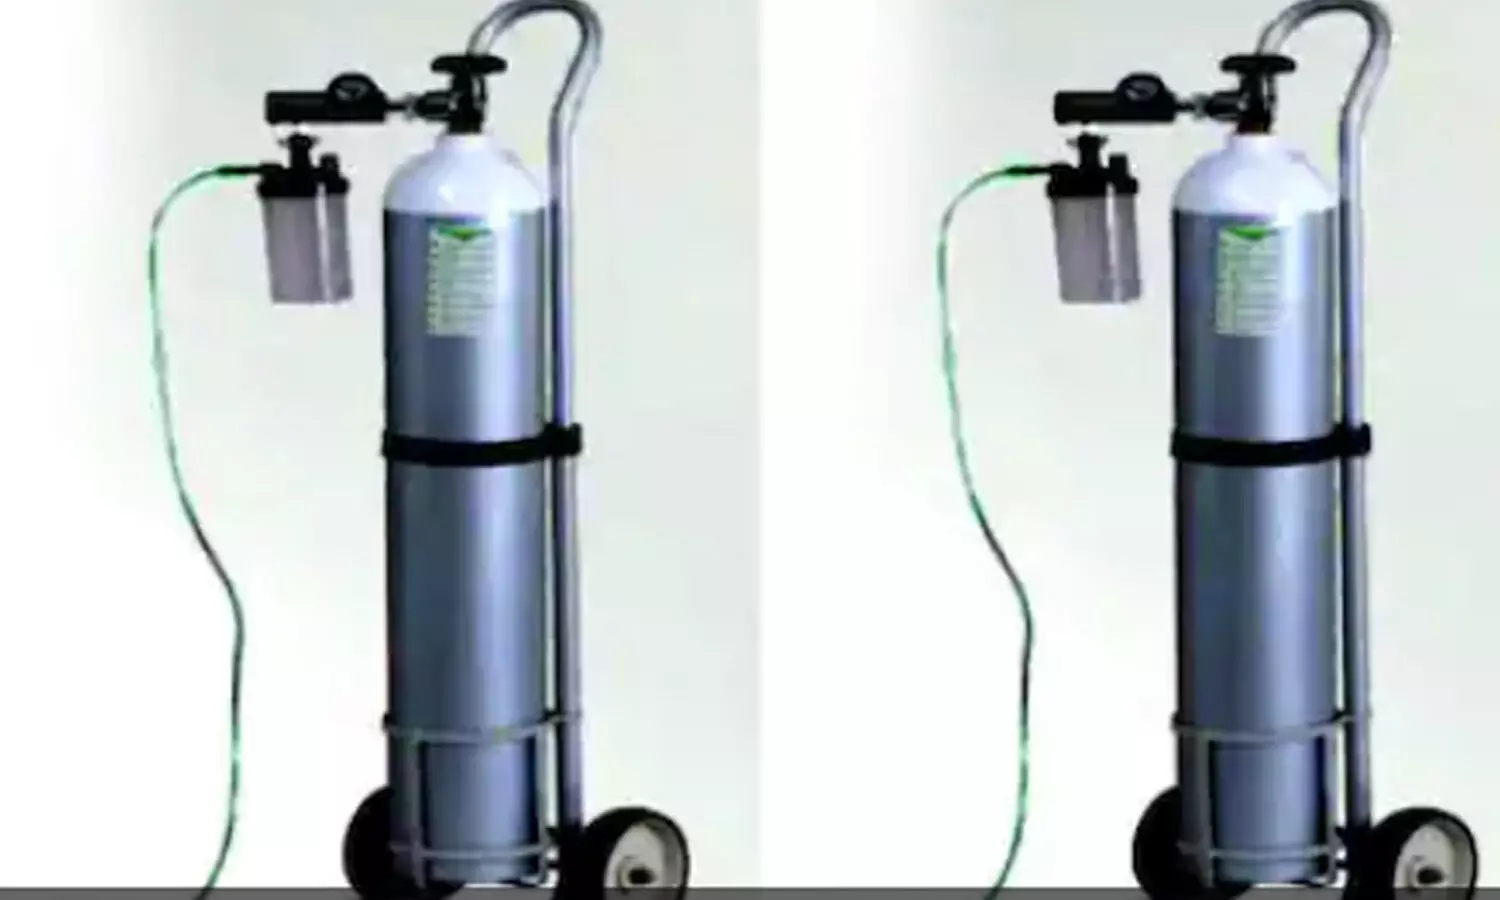 DRDO develops supplemental oxygen delivery system to help COVID patients